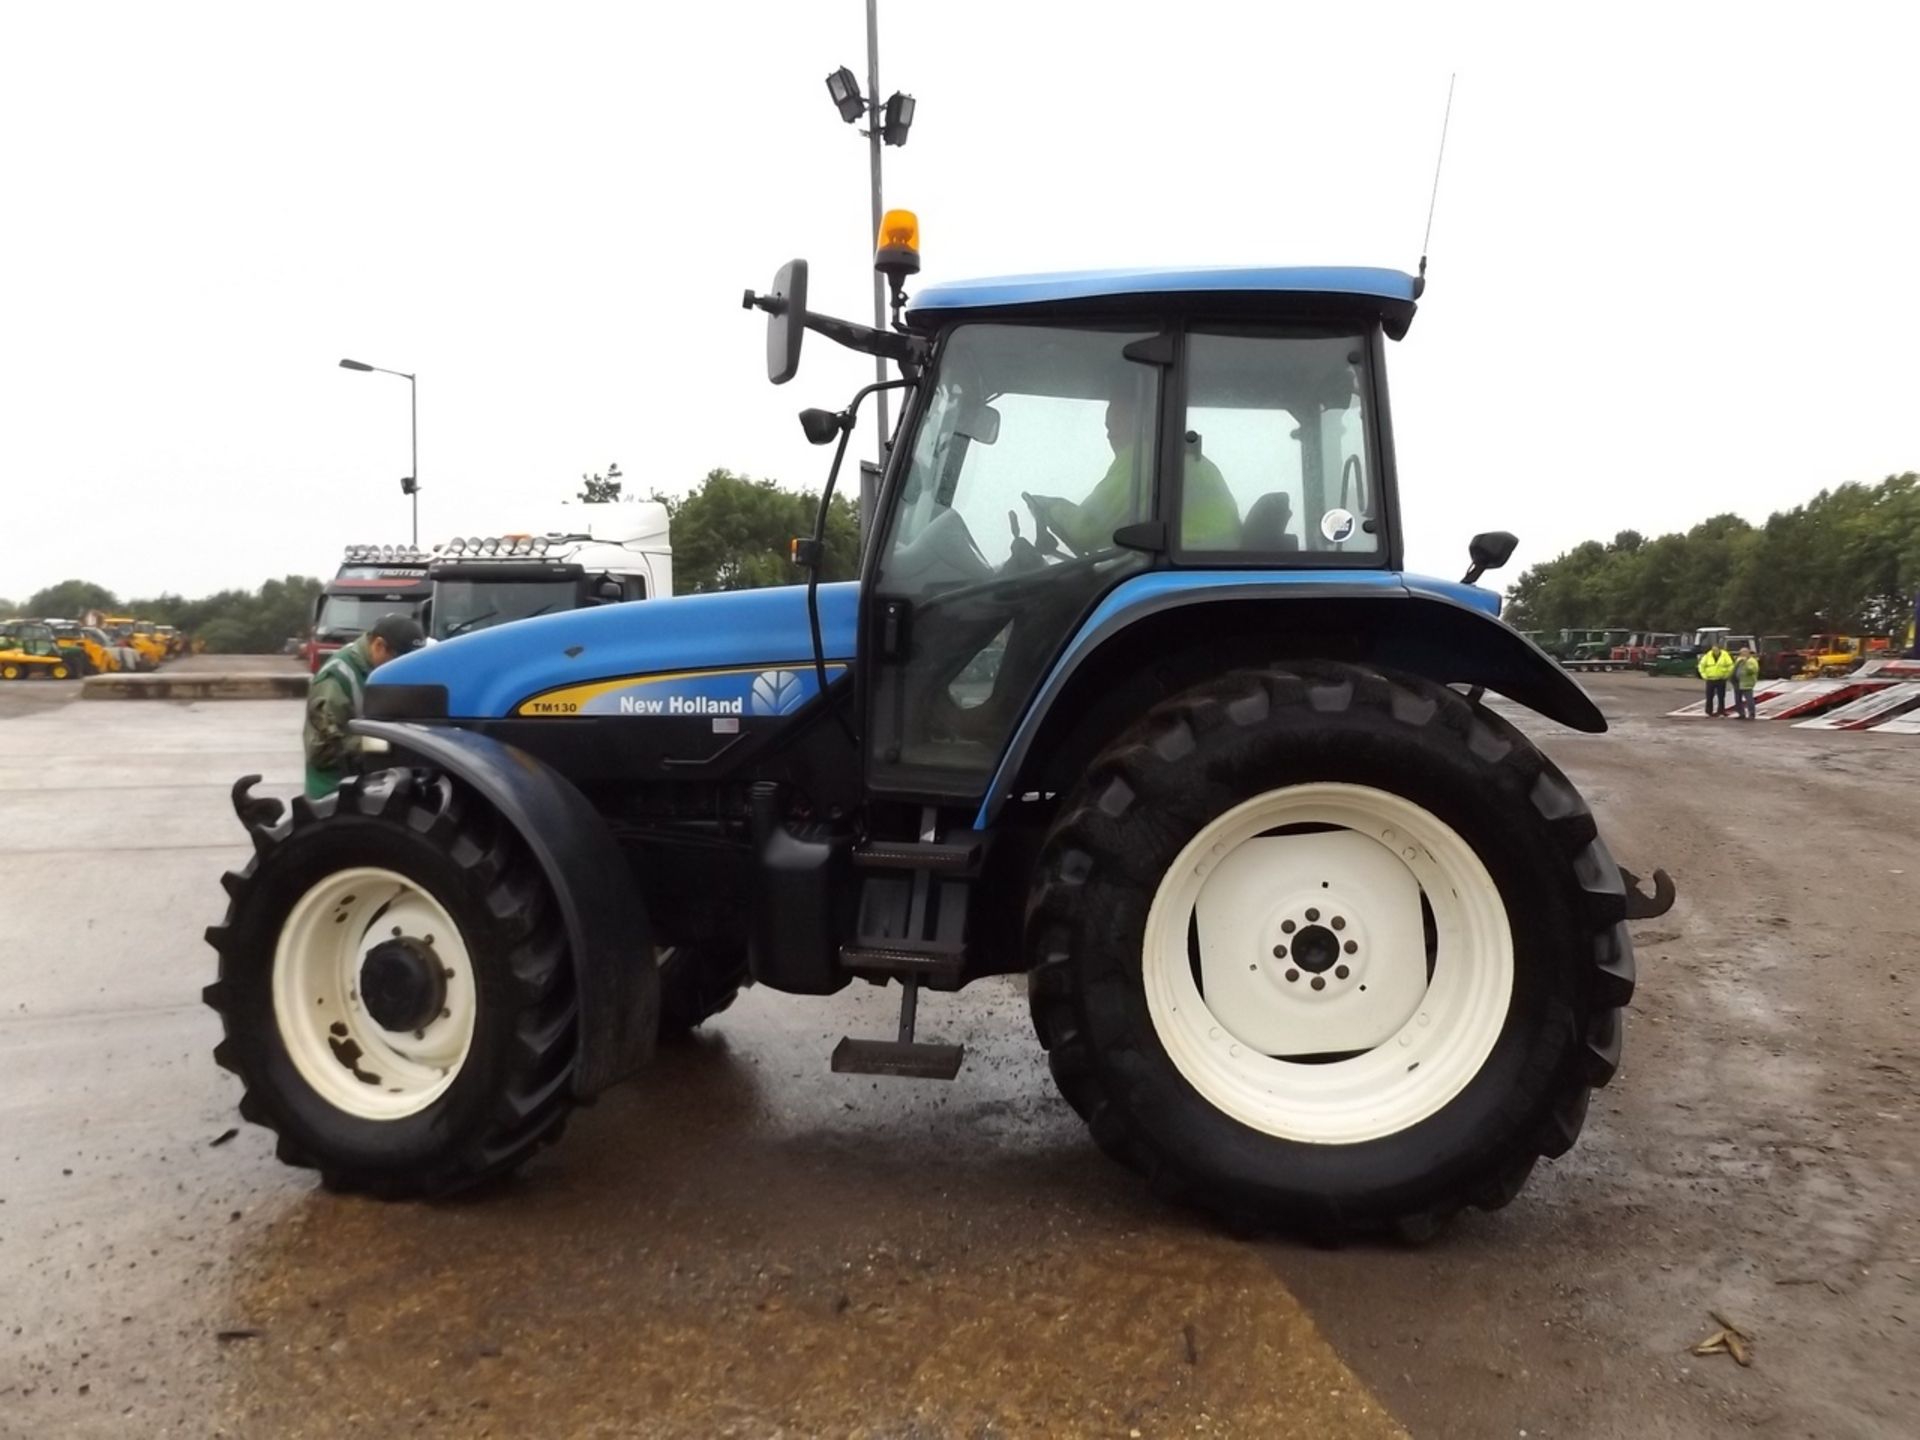 New Holland TM130 Range Command Tractor with Air Brakes. V5 will be supplied. Reg.No. MX57 GUE - Image 3 of 7